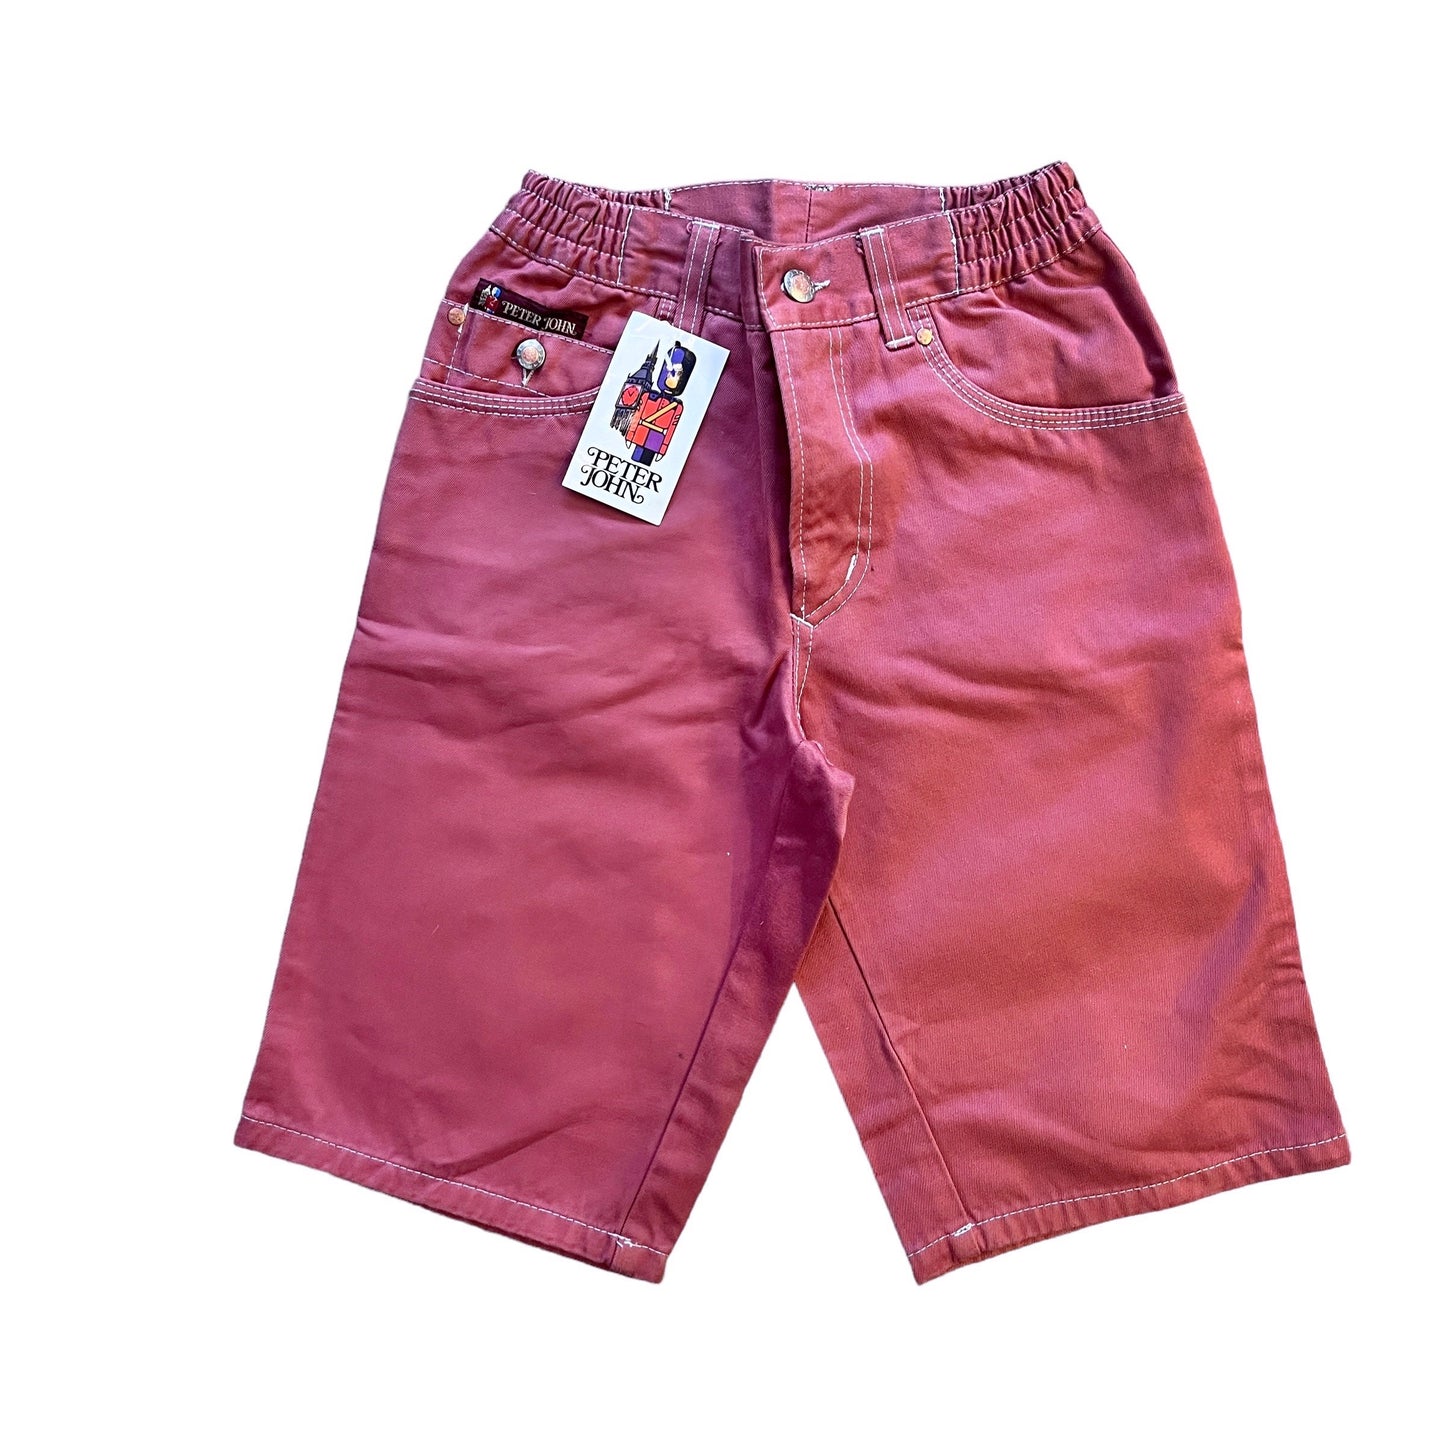 1980s Brownish Red Shorts / 8-10Y